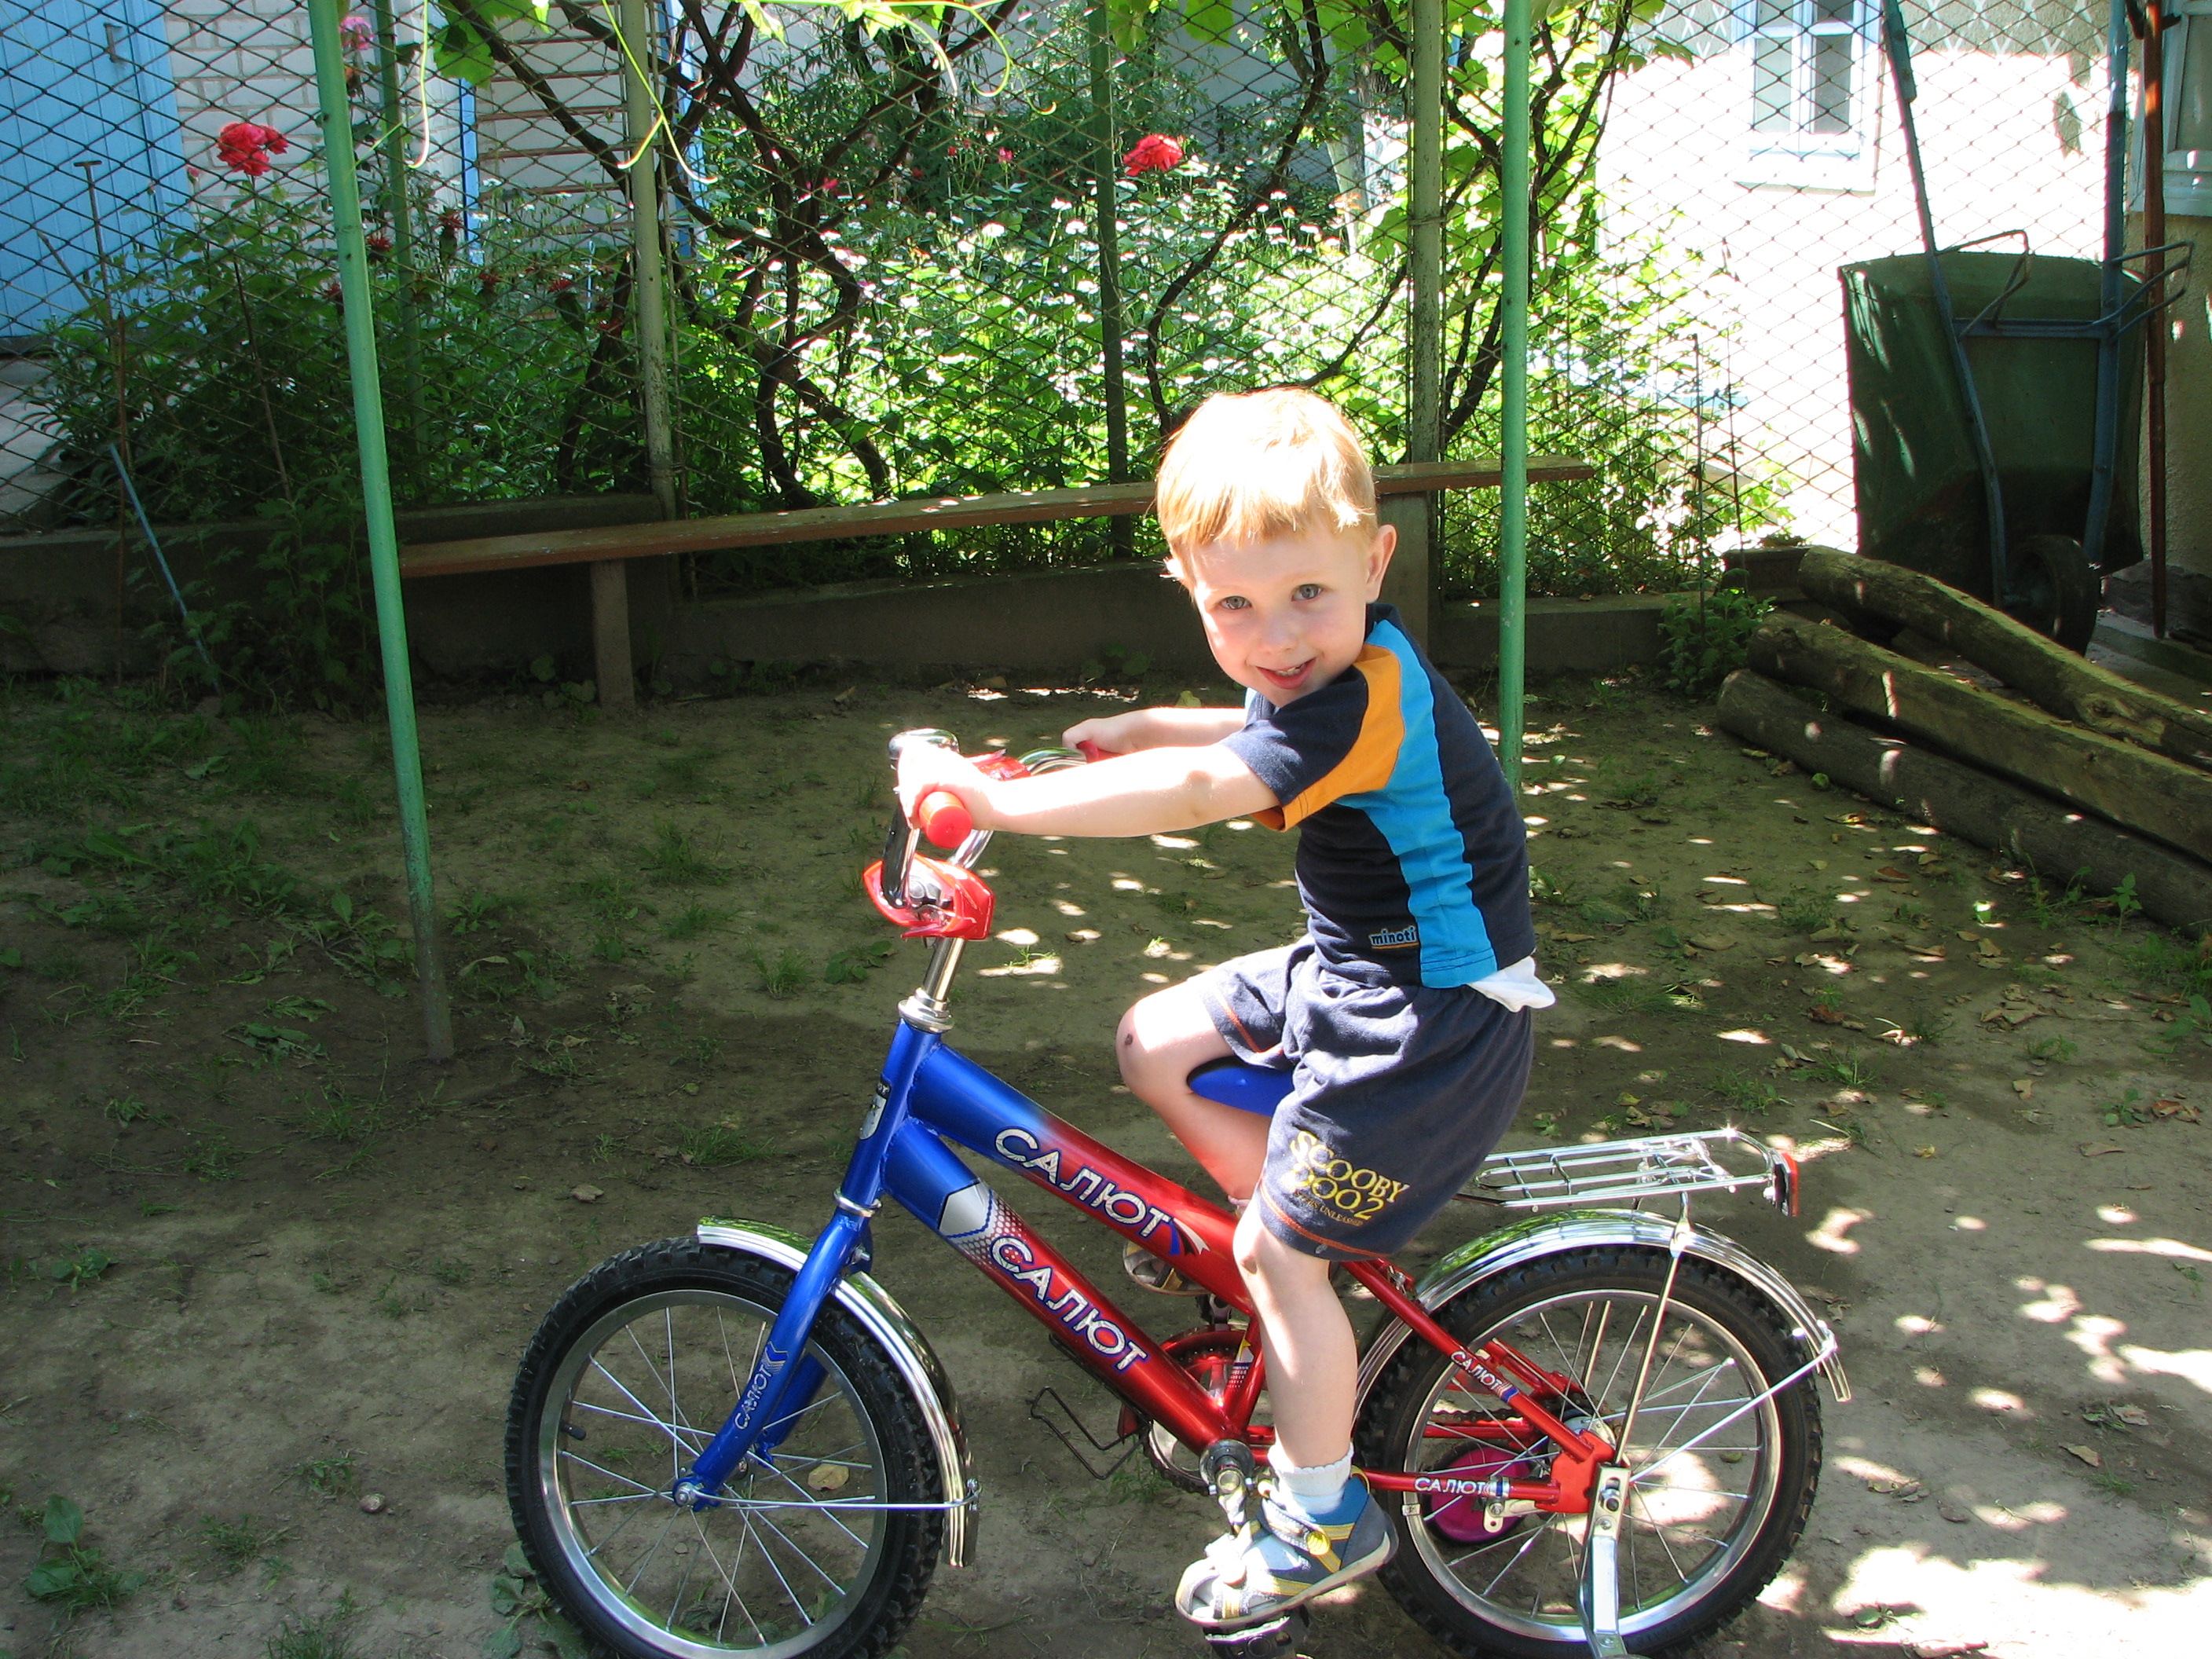 A small boy learning to ride one of his first bicycles